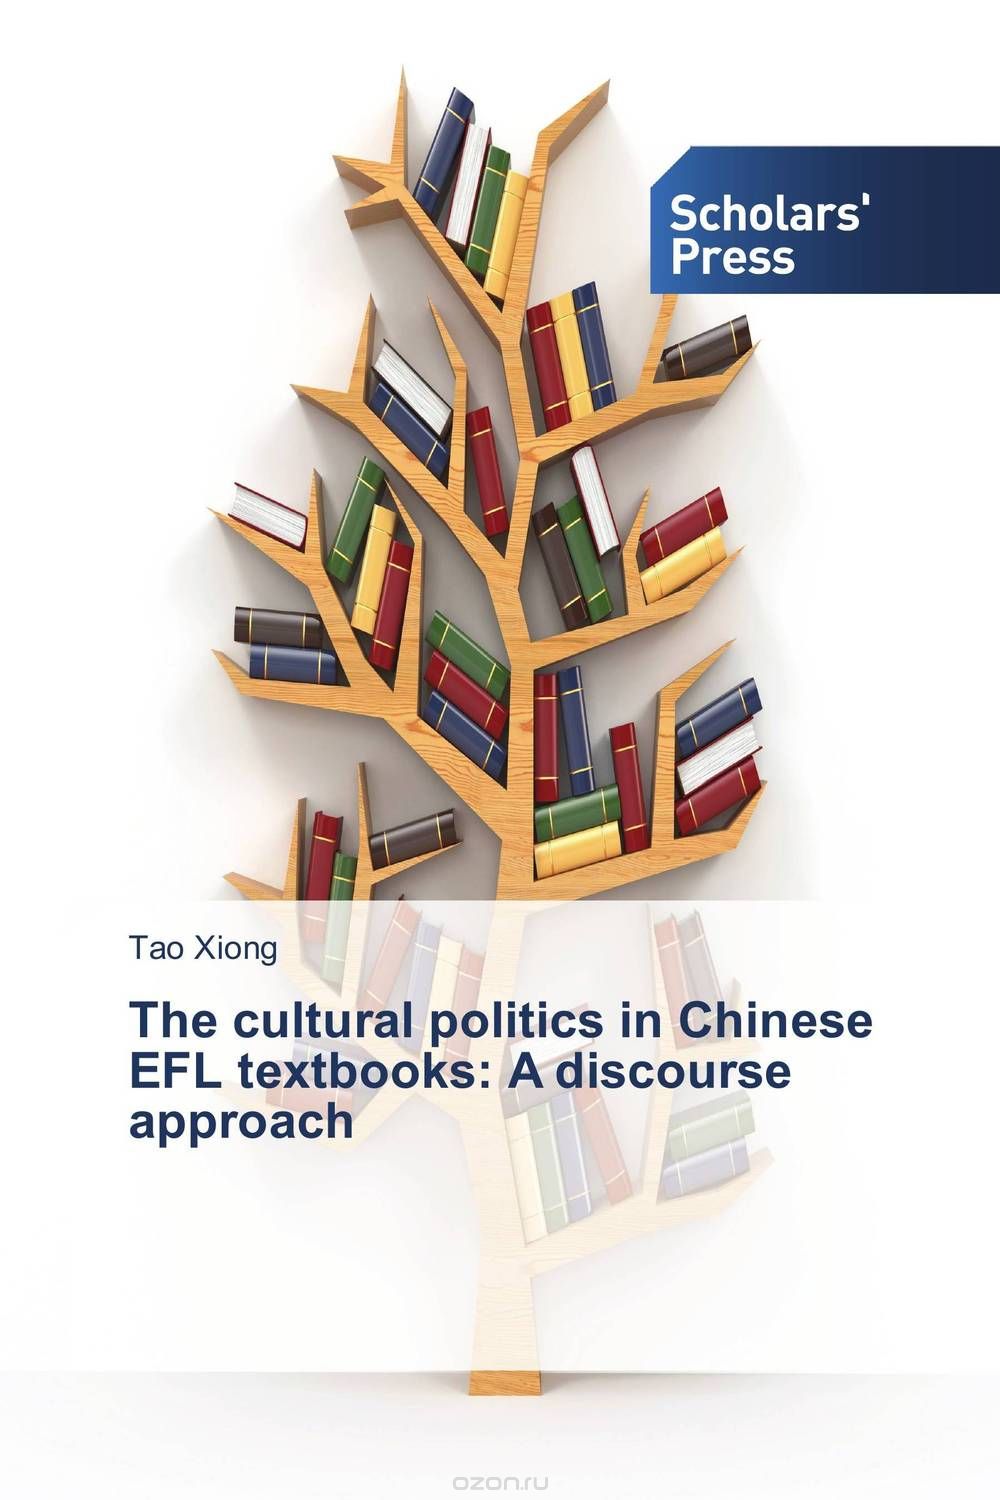 Скачать книгу "The cultural politics in Chinese EFL textbooks: A discourse approach"